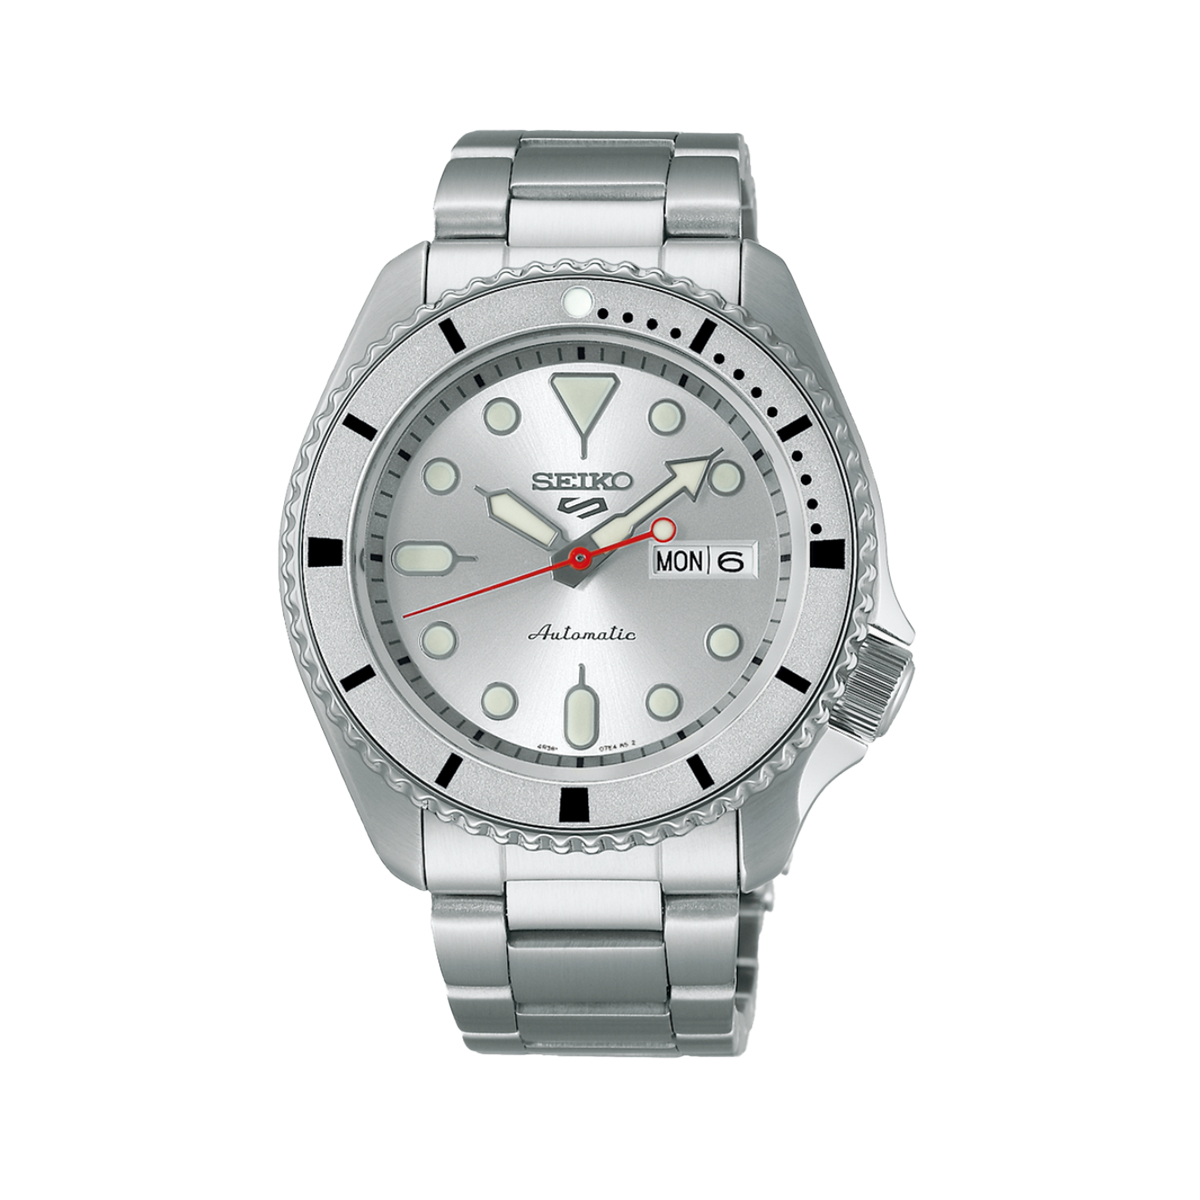 Stainless Steel 55th Anniversary Customize Campaign Limited Edition Seiko Watch